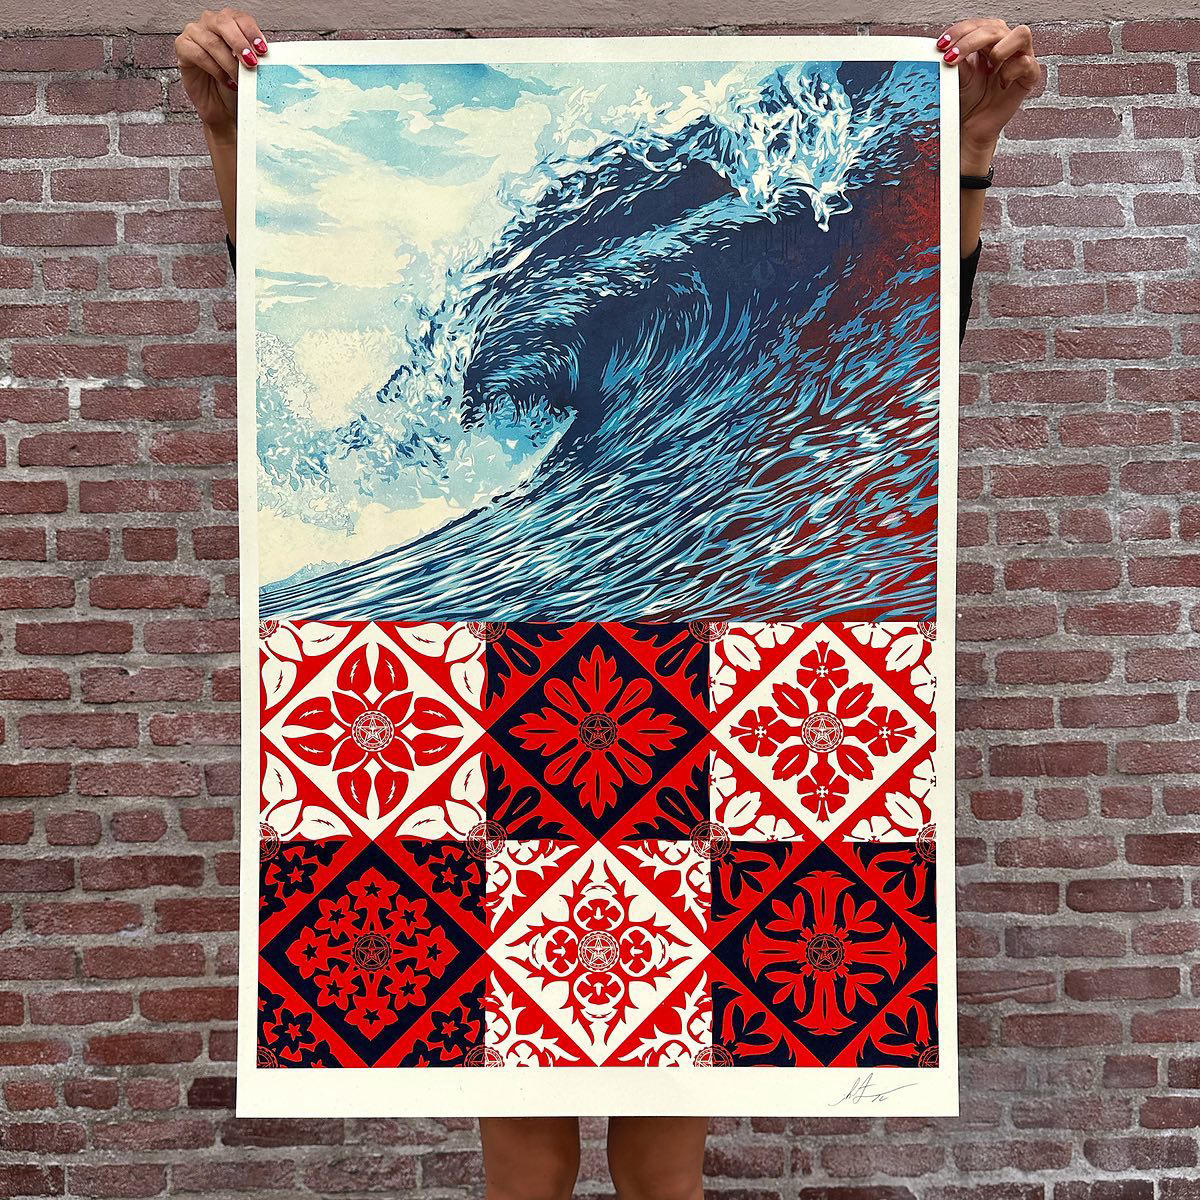 Shepard Fairey - NEW offset print release, “Wave of Distress” available now on store